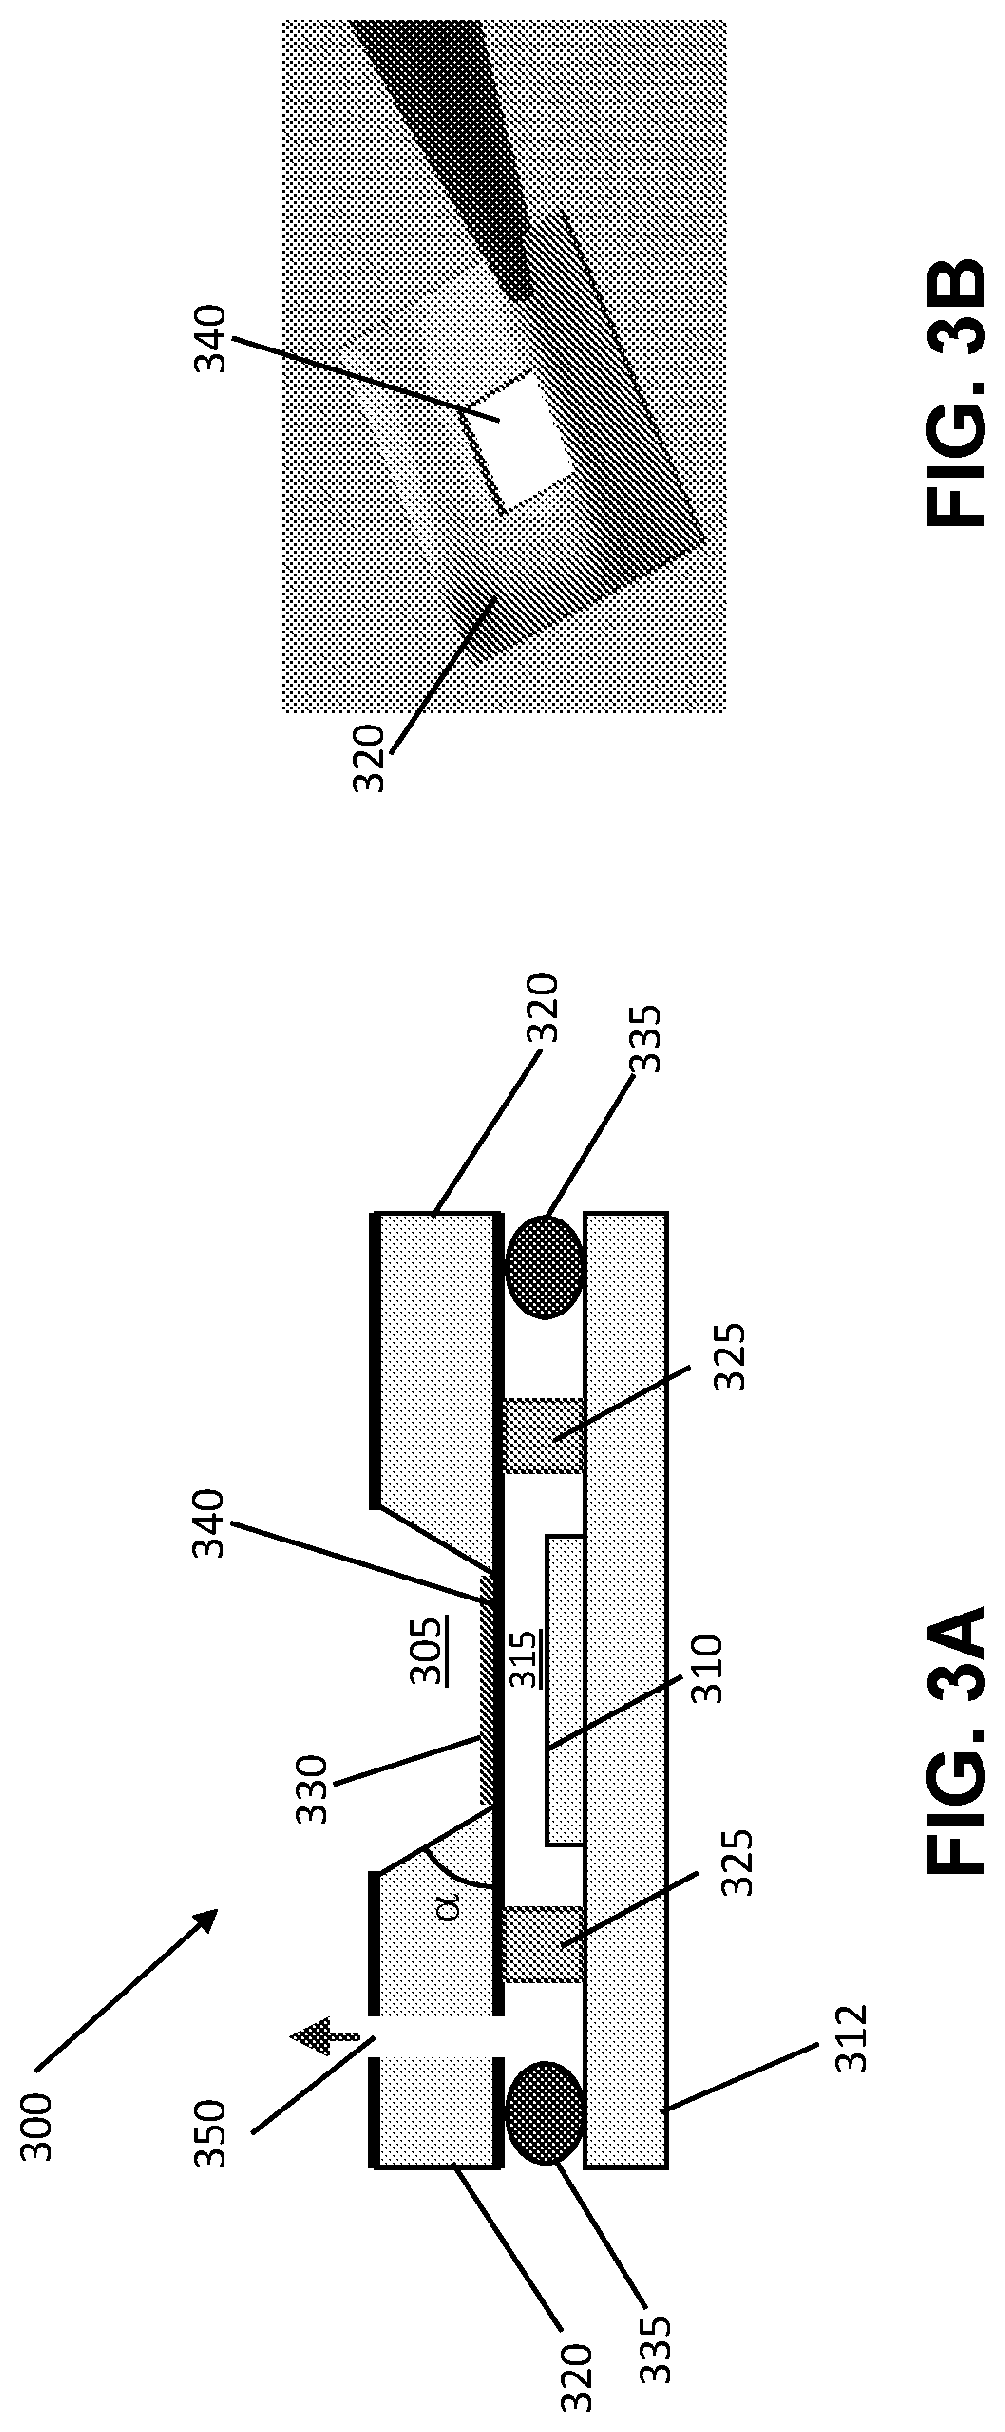 Methods and apparatus for sample measurement